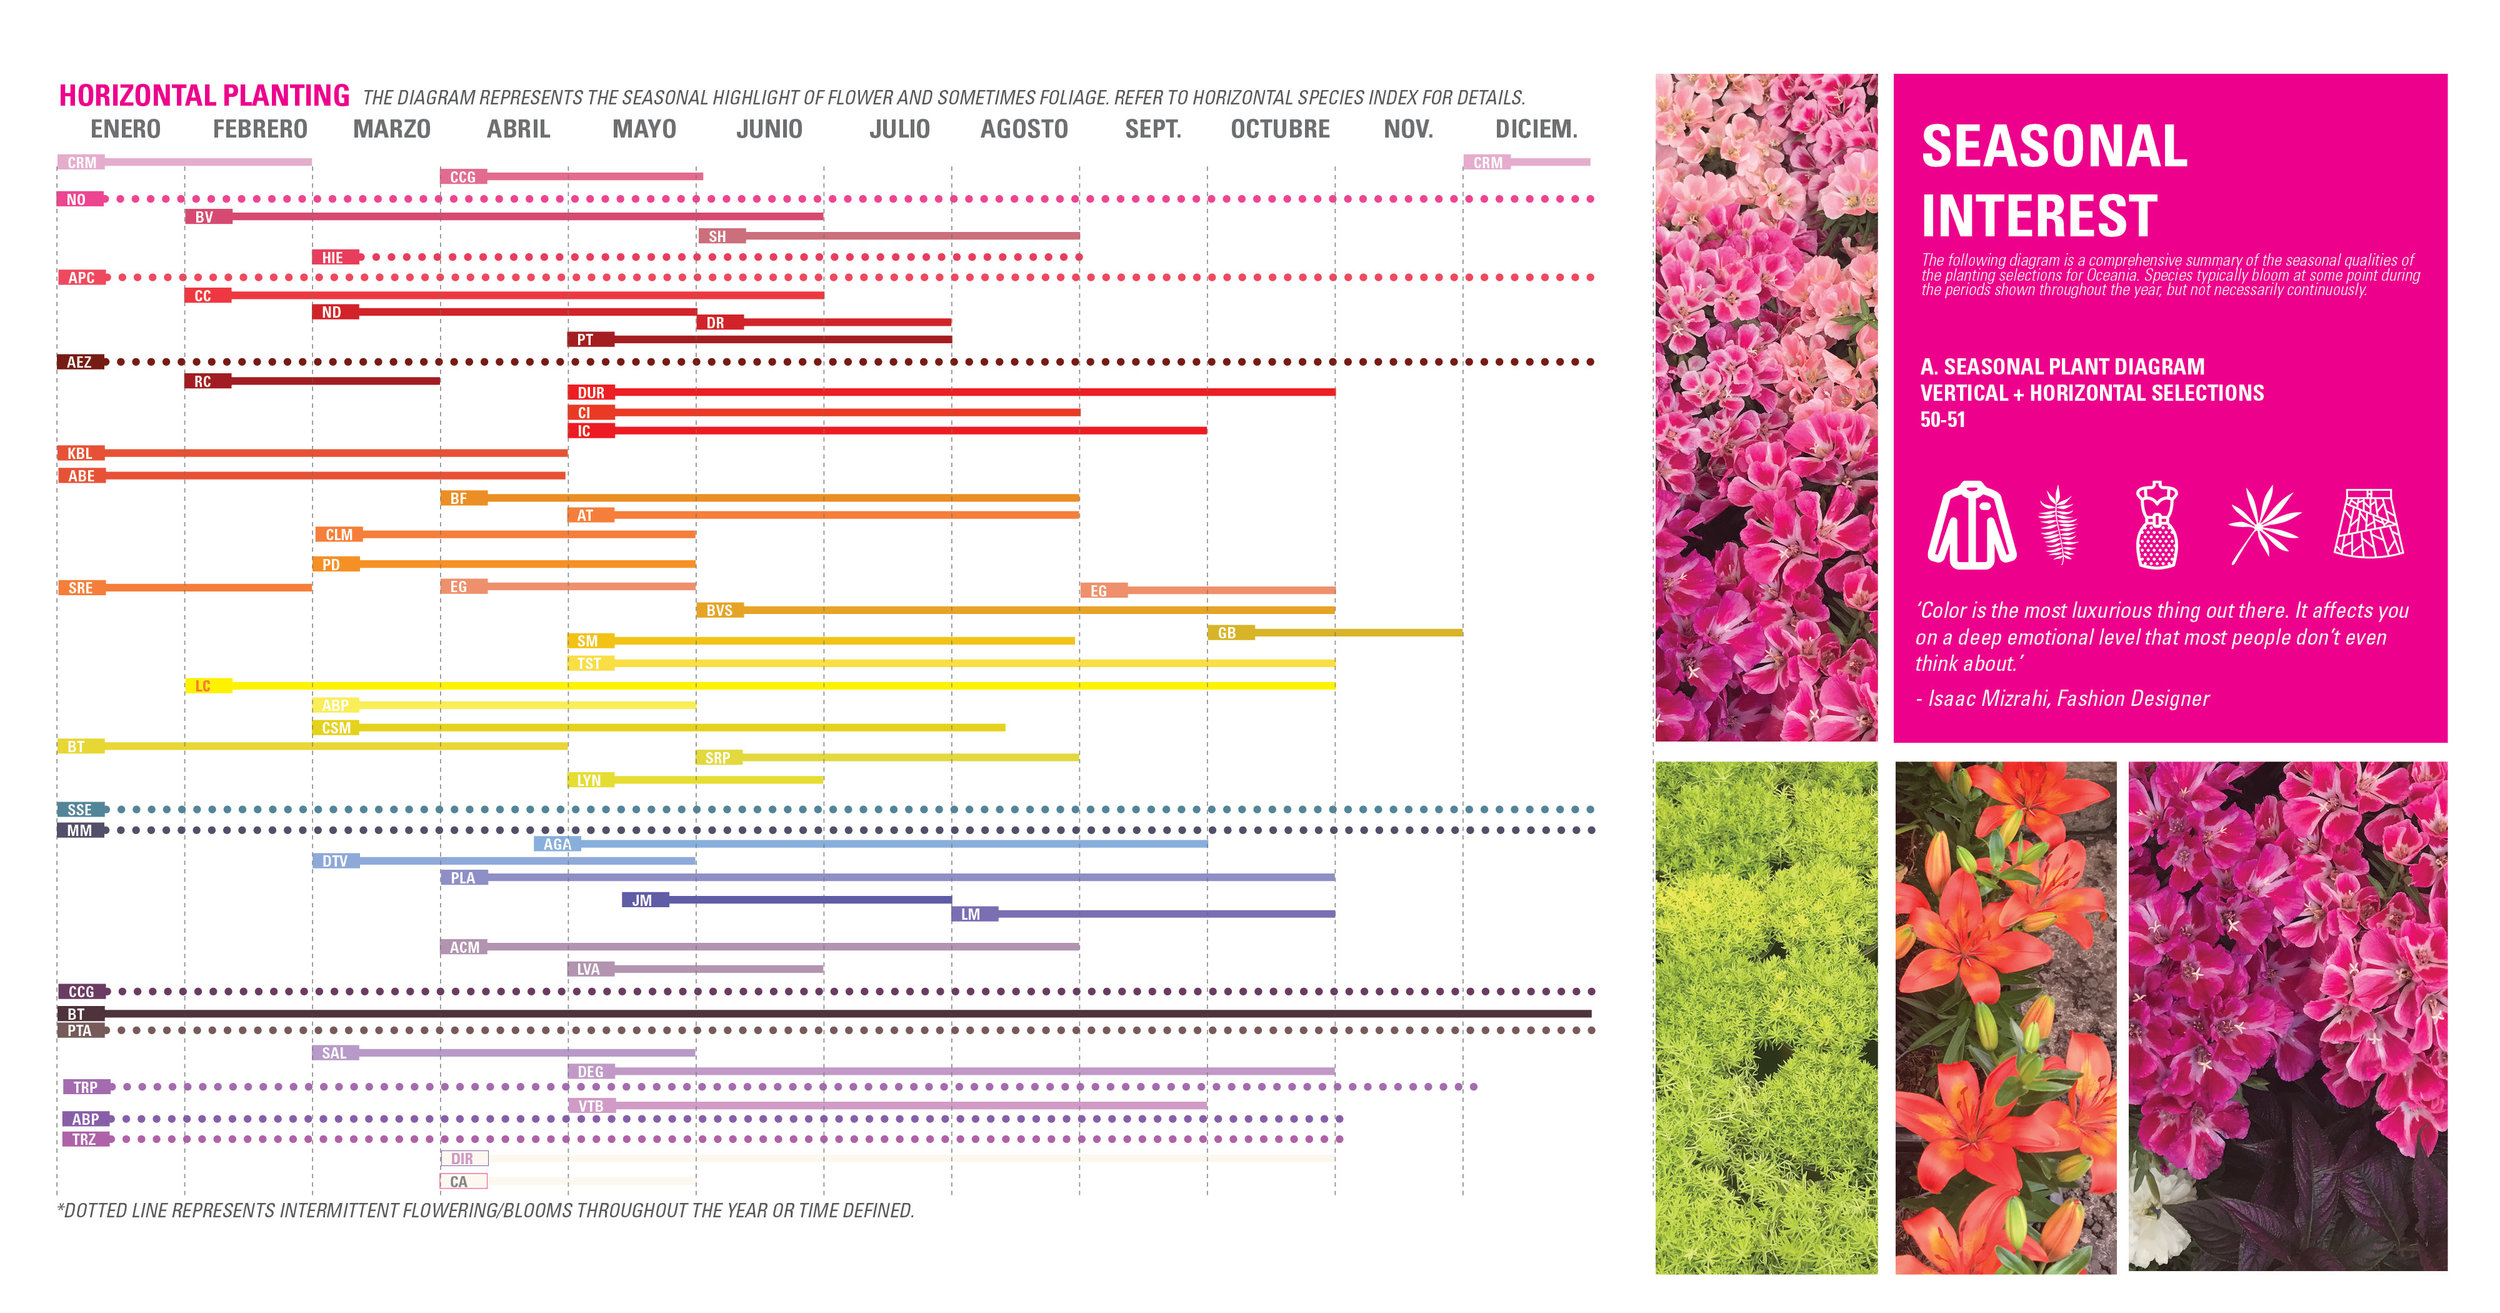  A seasonal interest calendar provides multiple charts that illustrate the color and bloom timing of different plant species to help create dynamic and long-lasting interest in future plantings. It was important to maintain a balance of seasonal inte